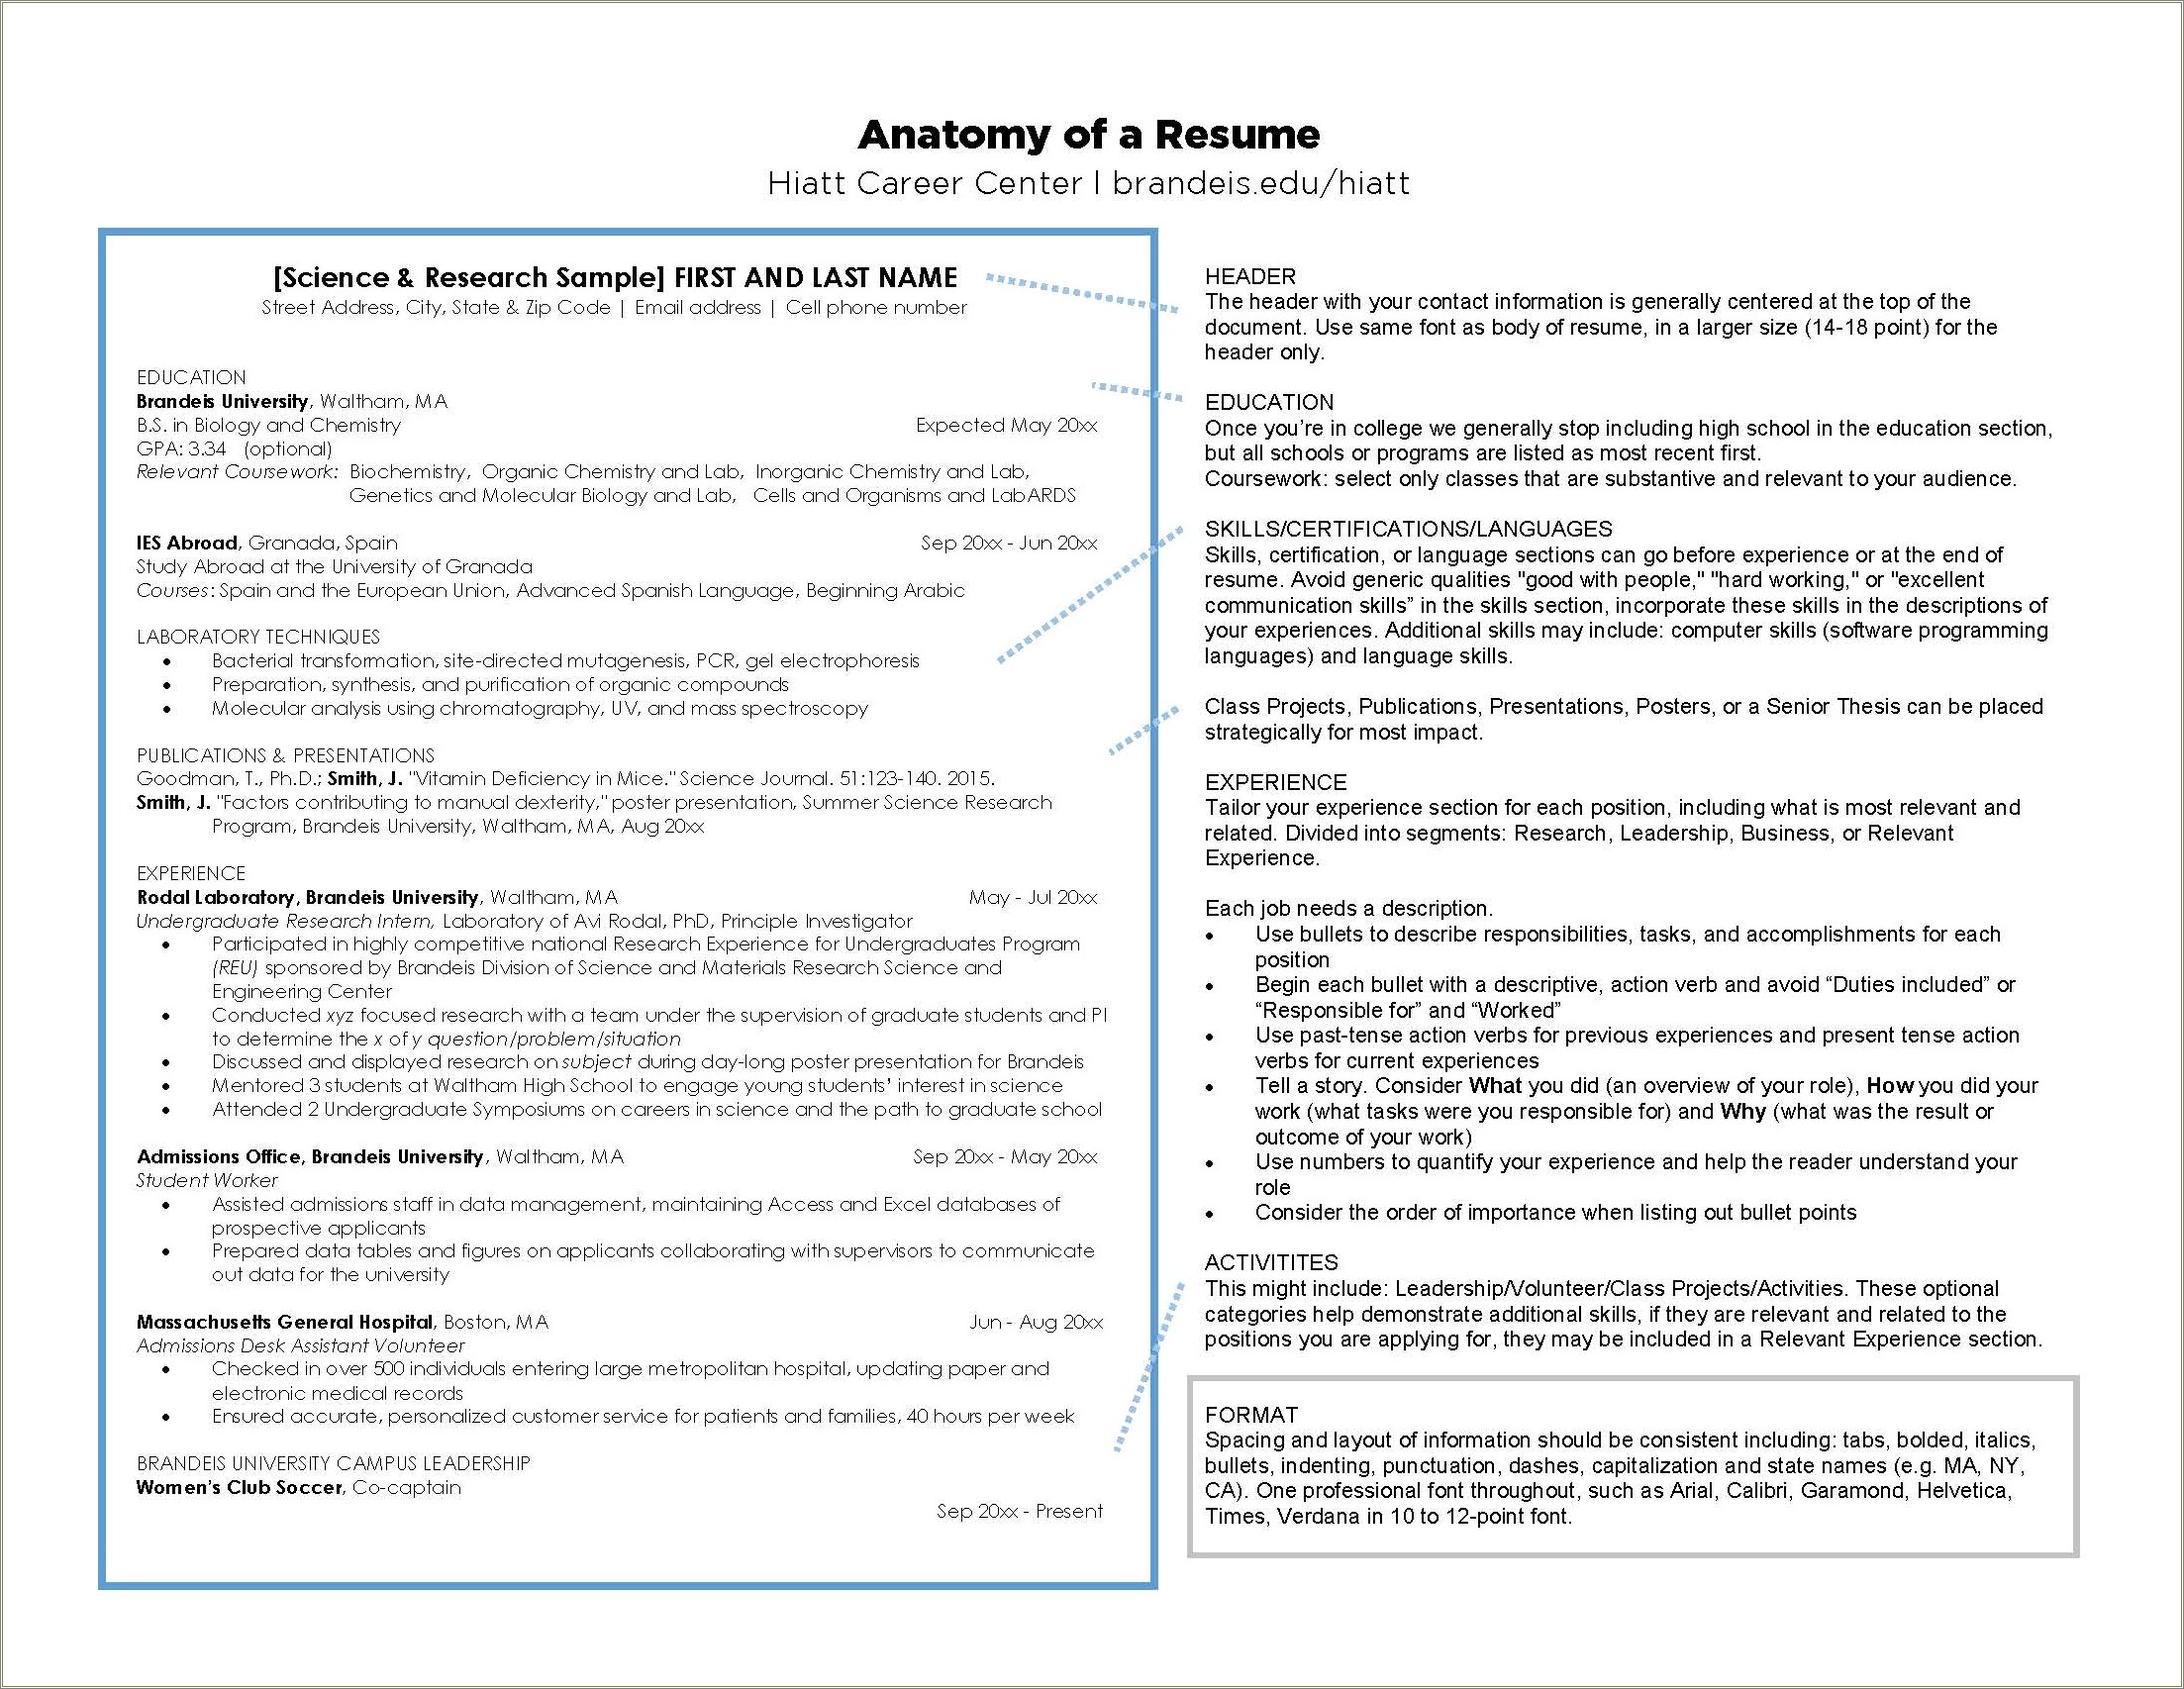 Address Experience In Higher Education In Resume